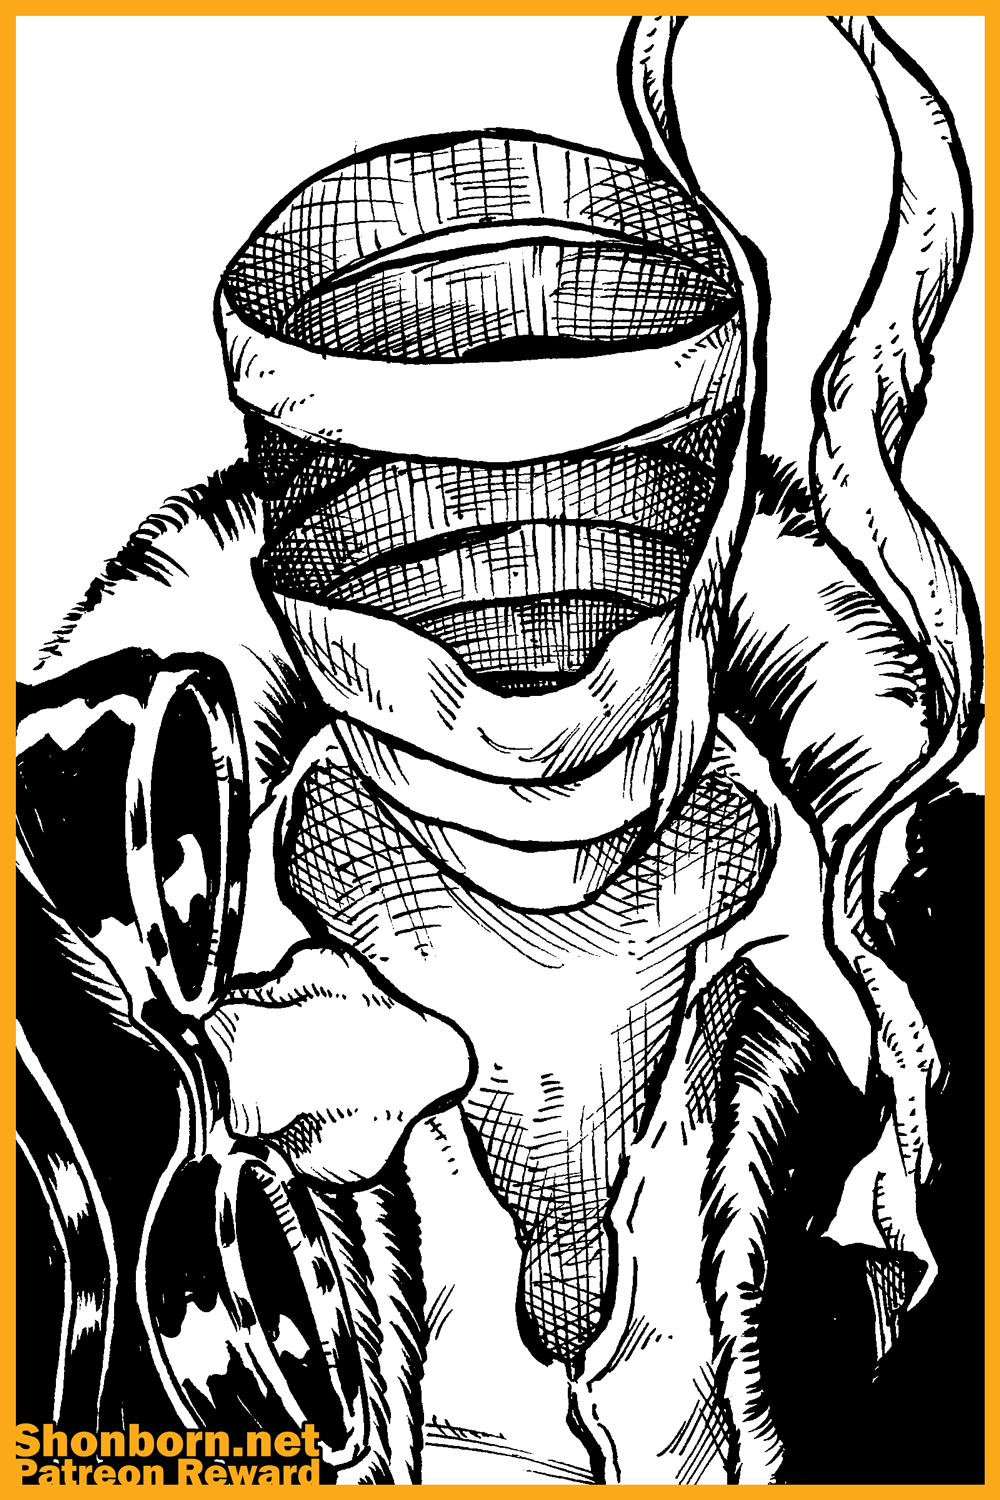 Patreon Catchall – The Invisible Man